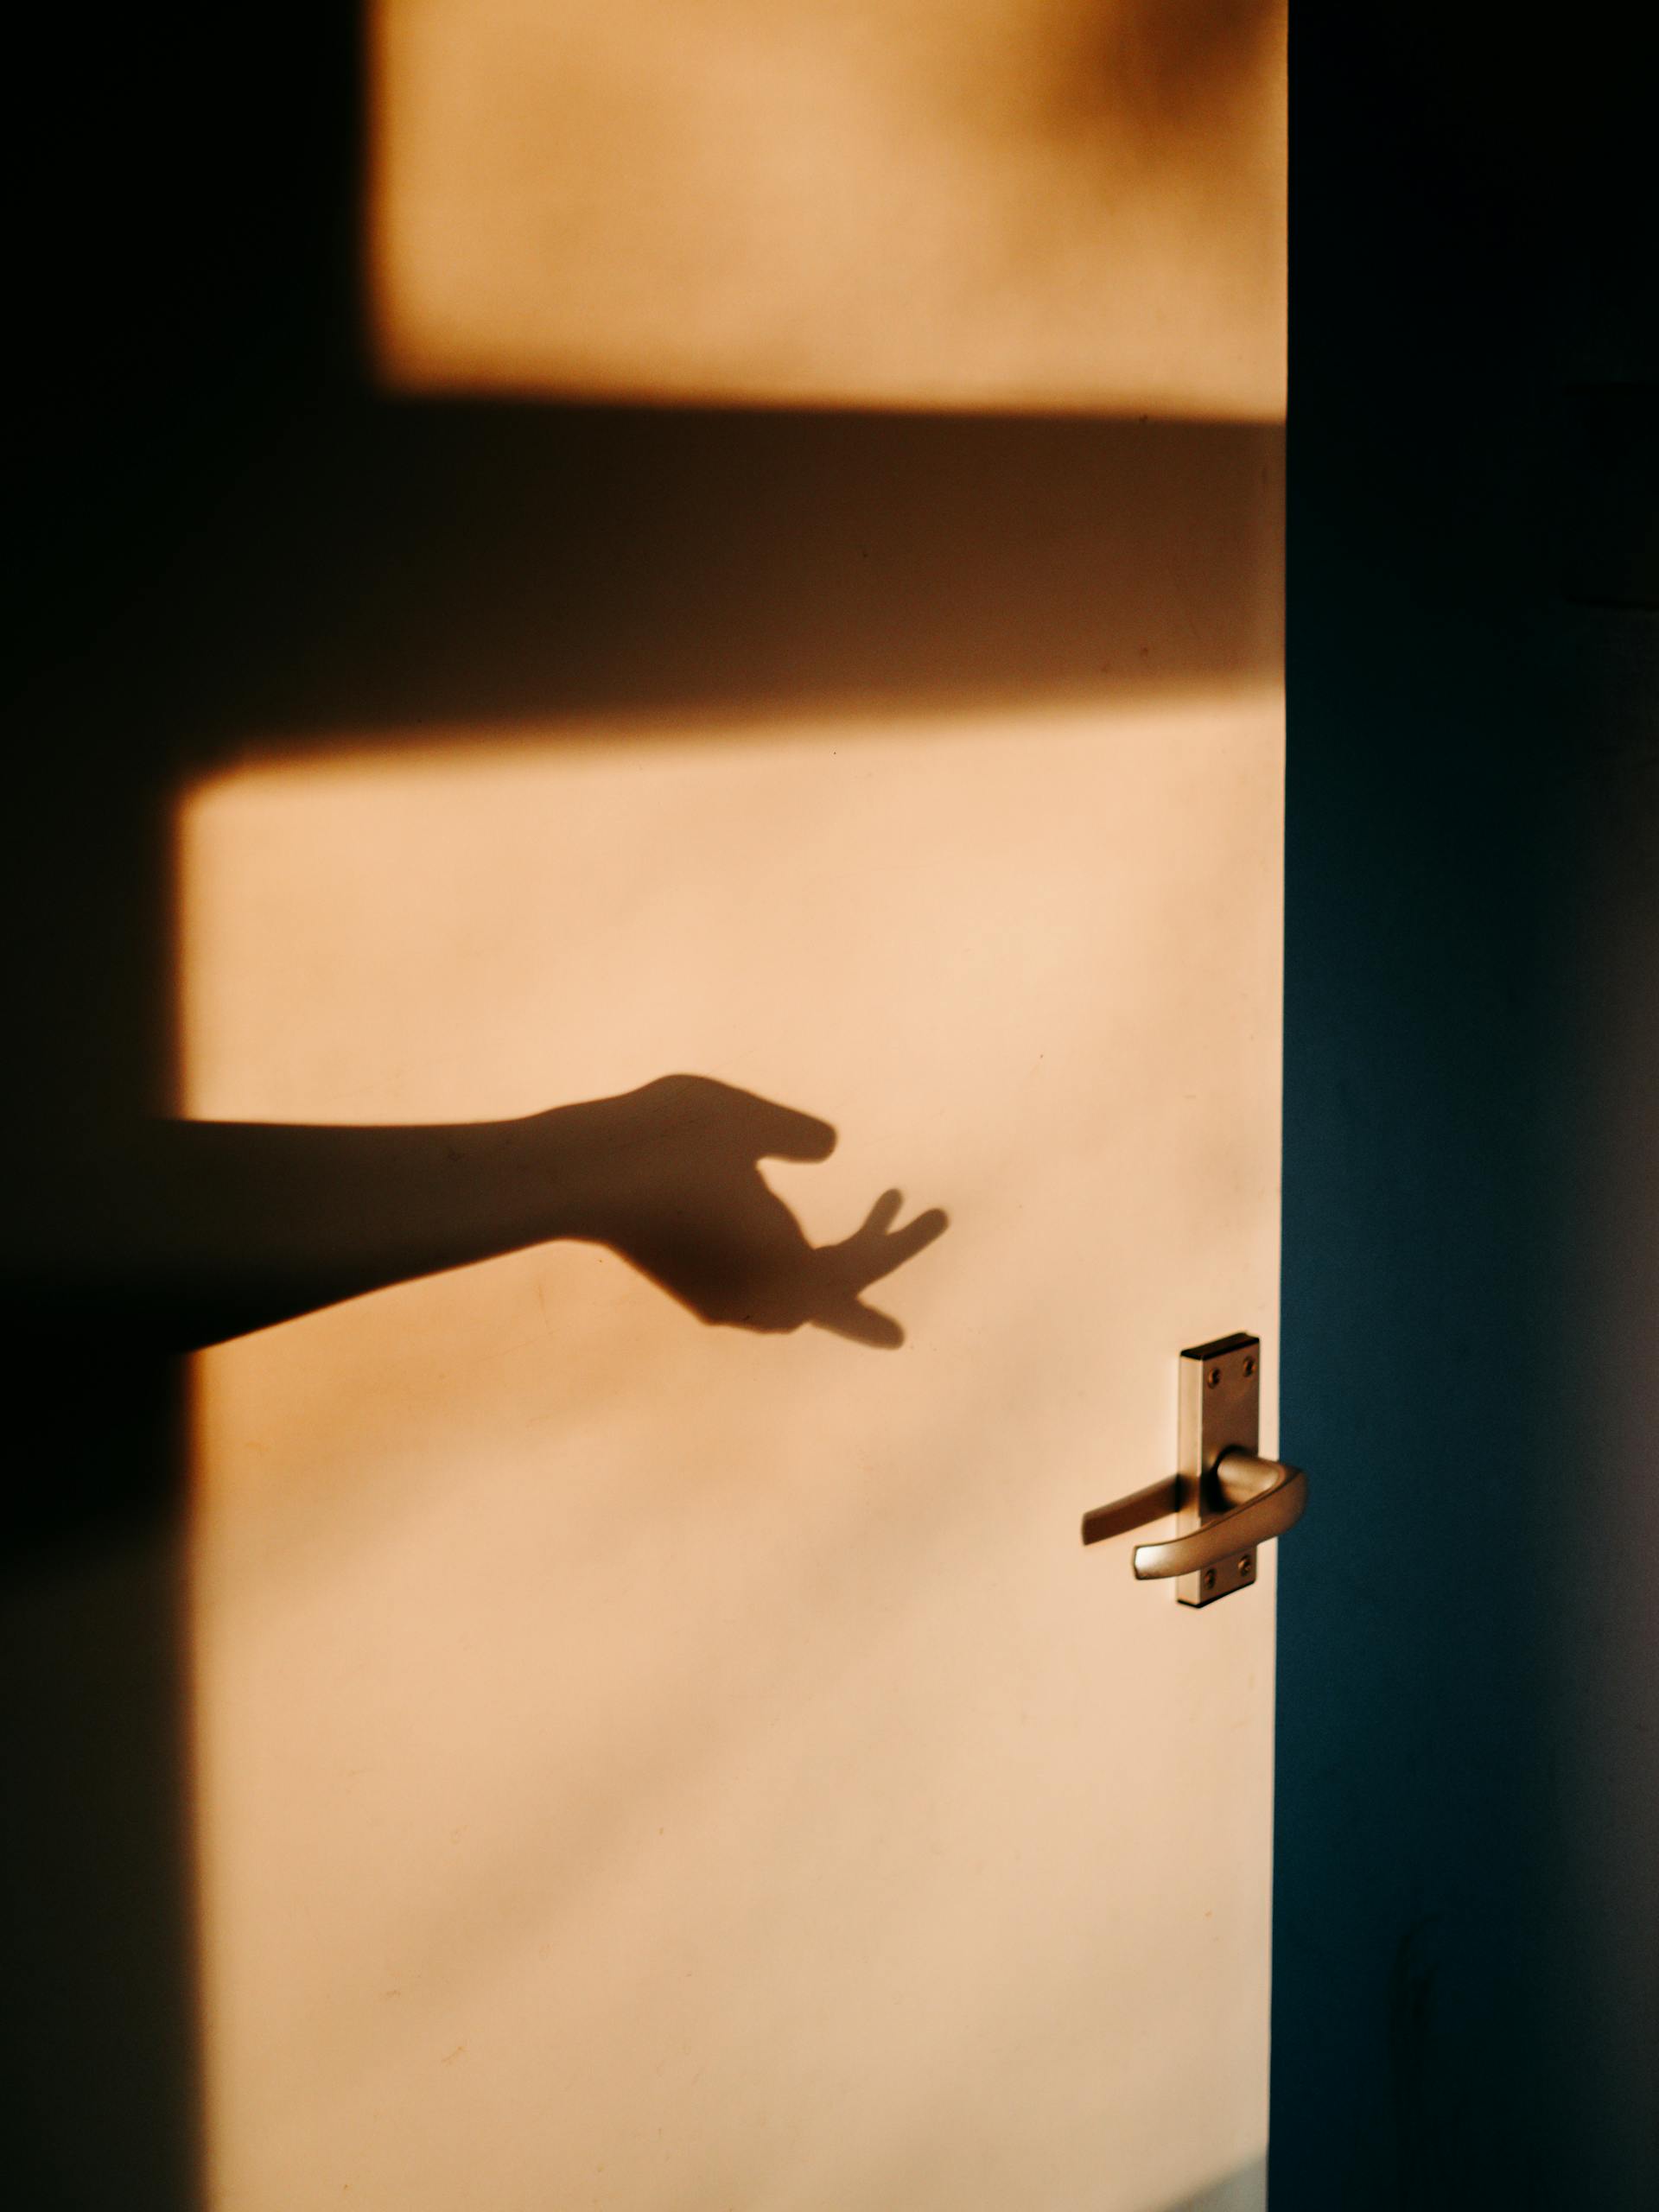 A shadow of a person's hand | Source: Pexels